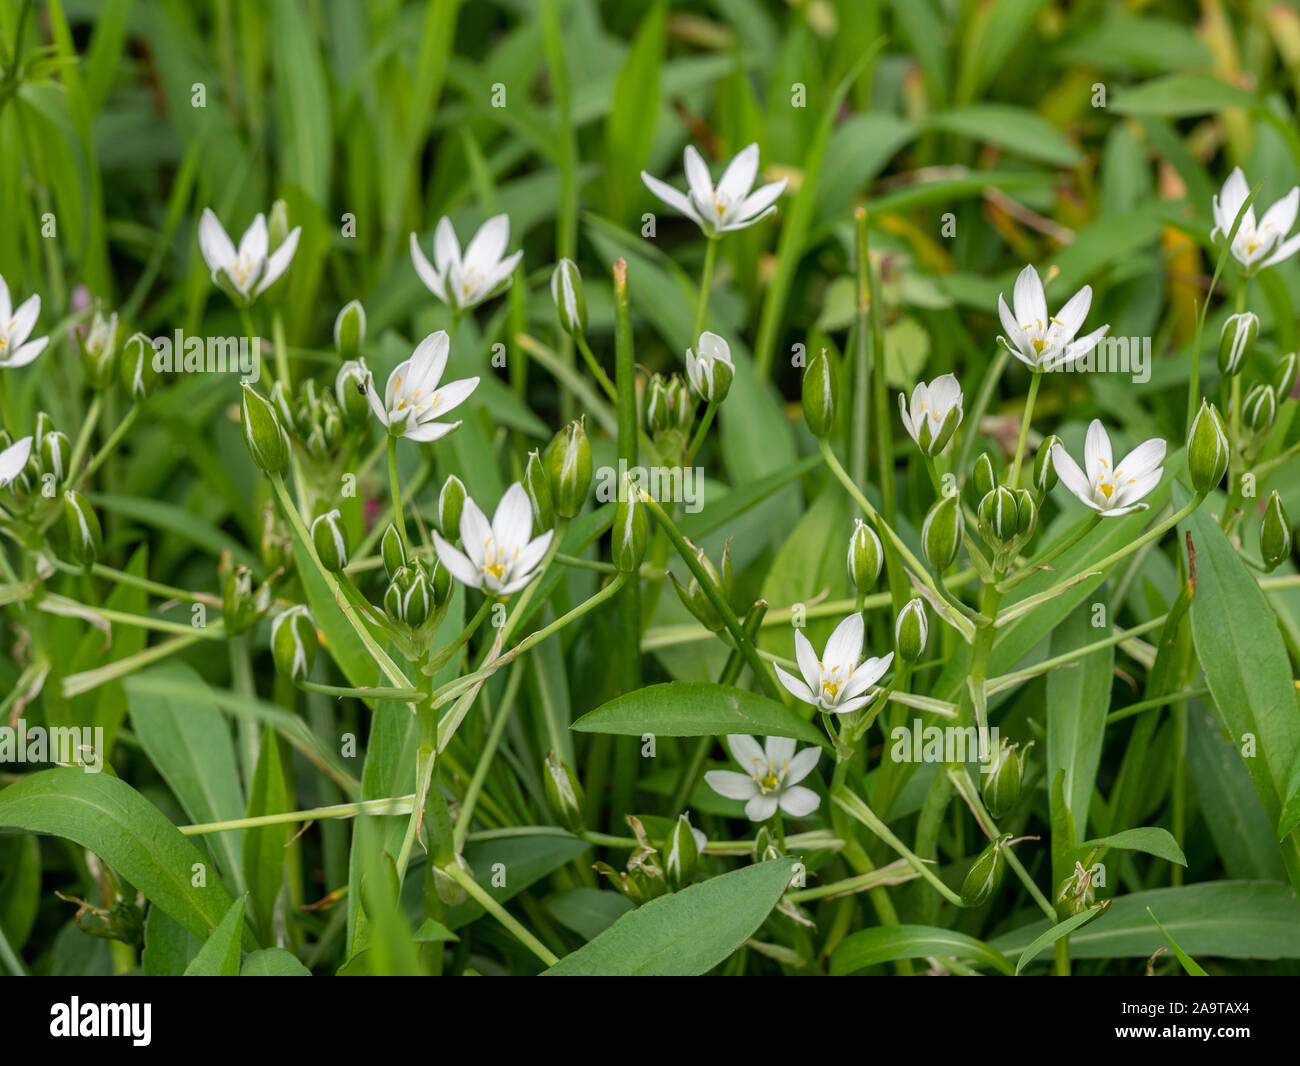 Garden star of Bethlehem white flowers growing from flower bulbs and blooming in the spring Stock Photo